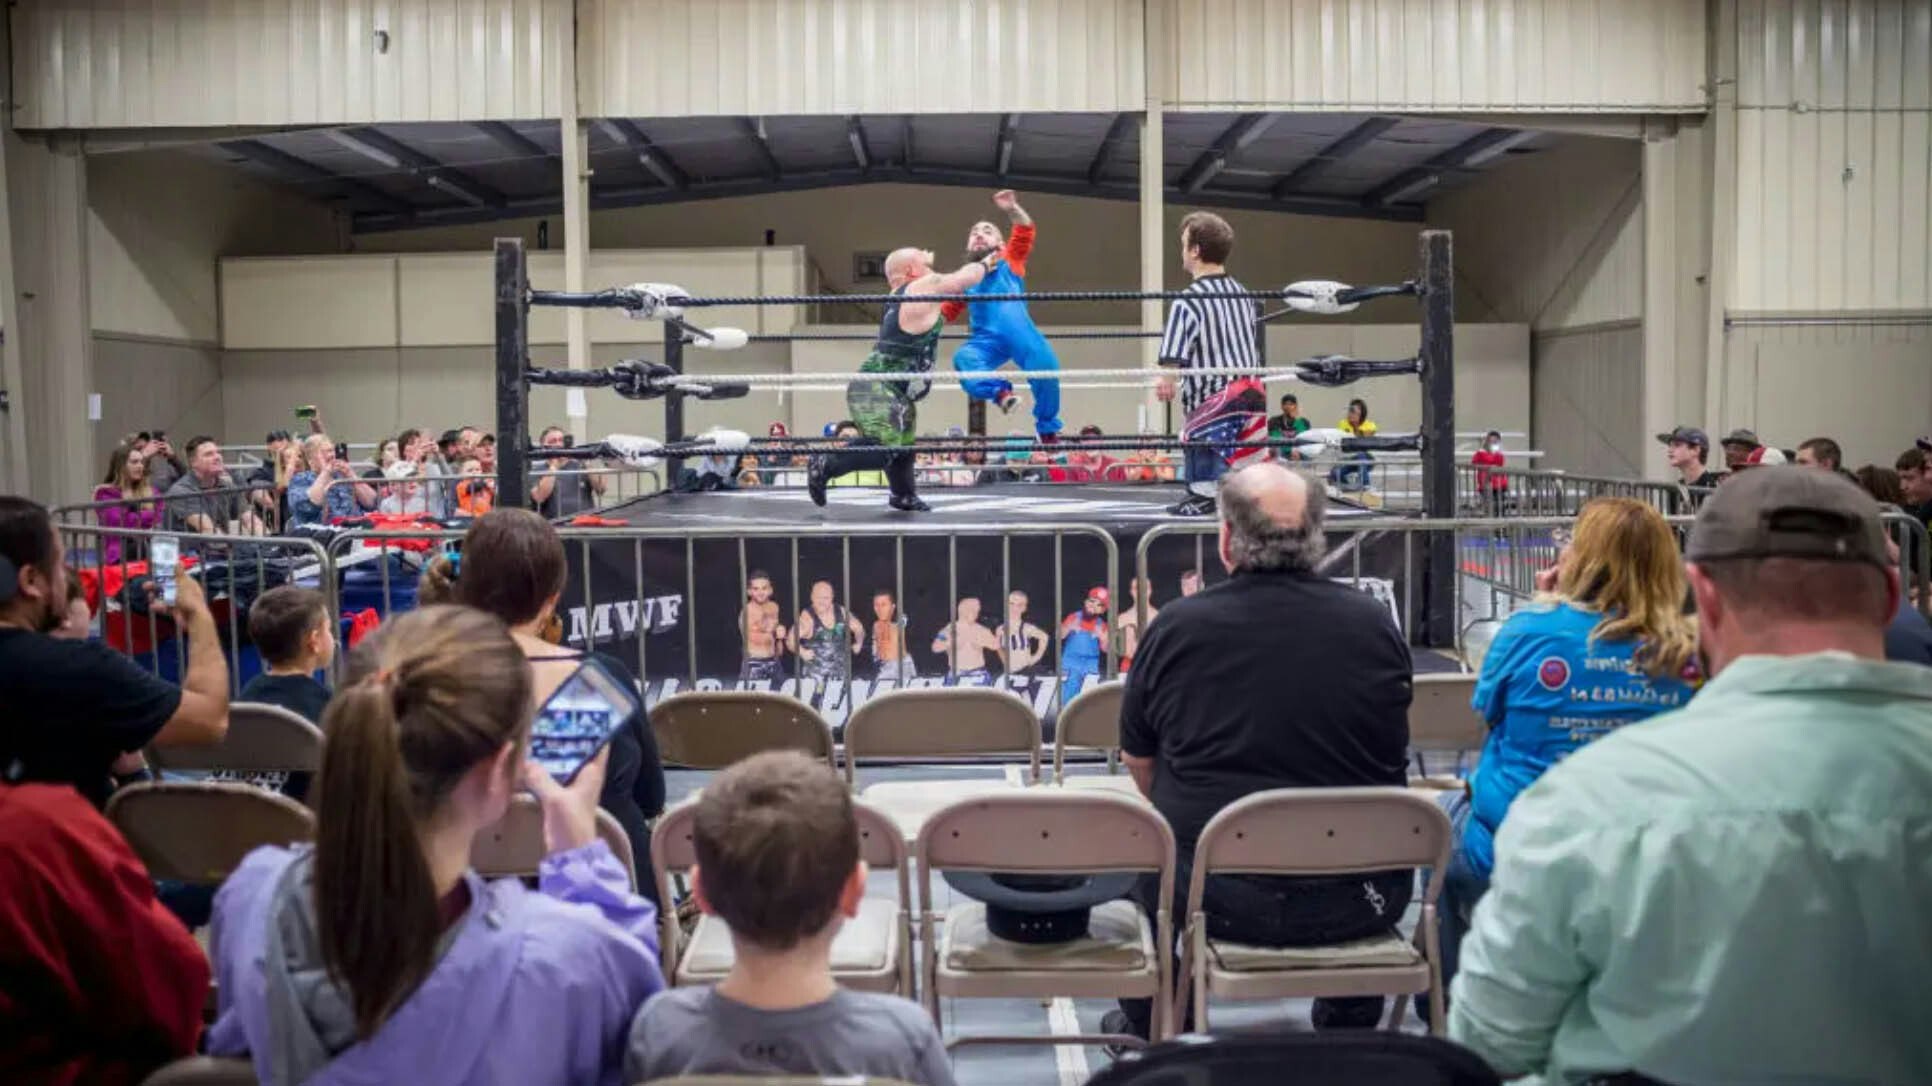 The Micro Wrestling Federation is growing in popularity, performing in venues large and small across the U.S.